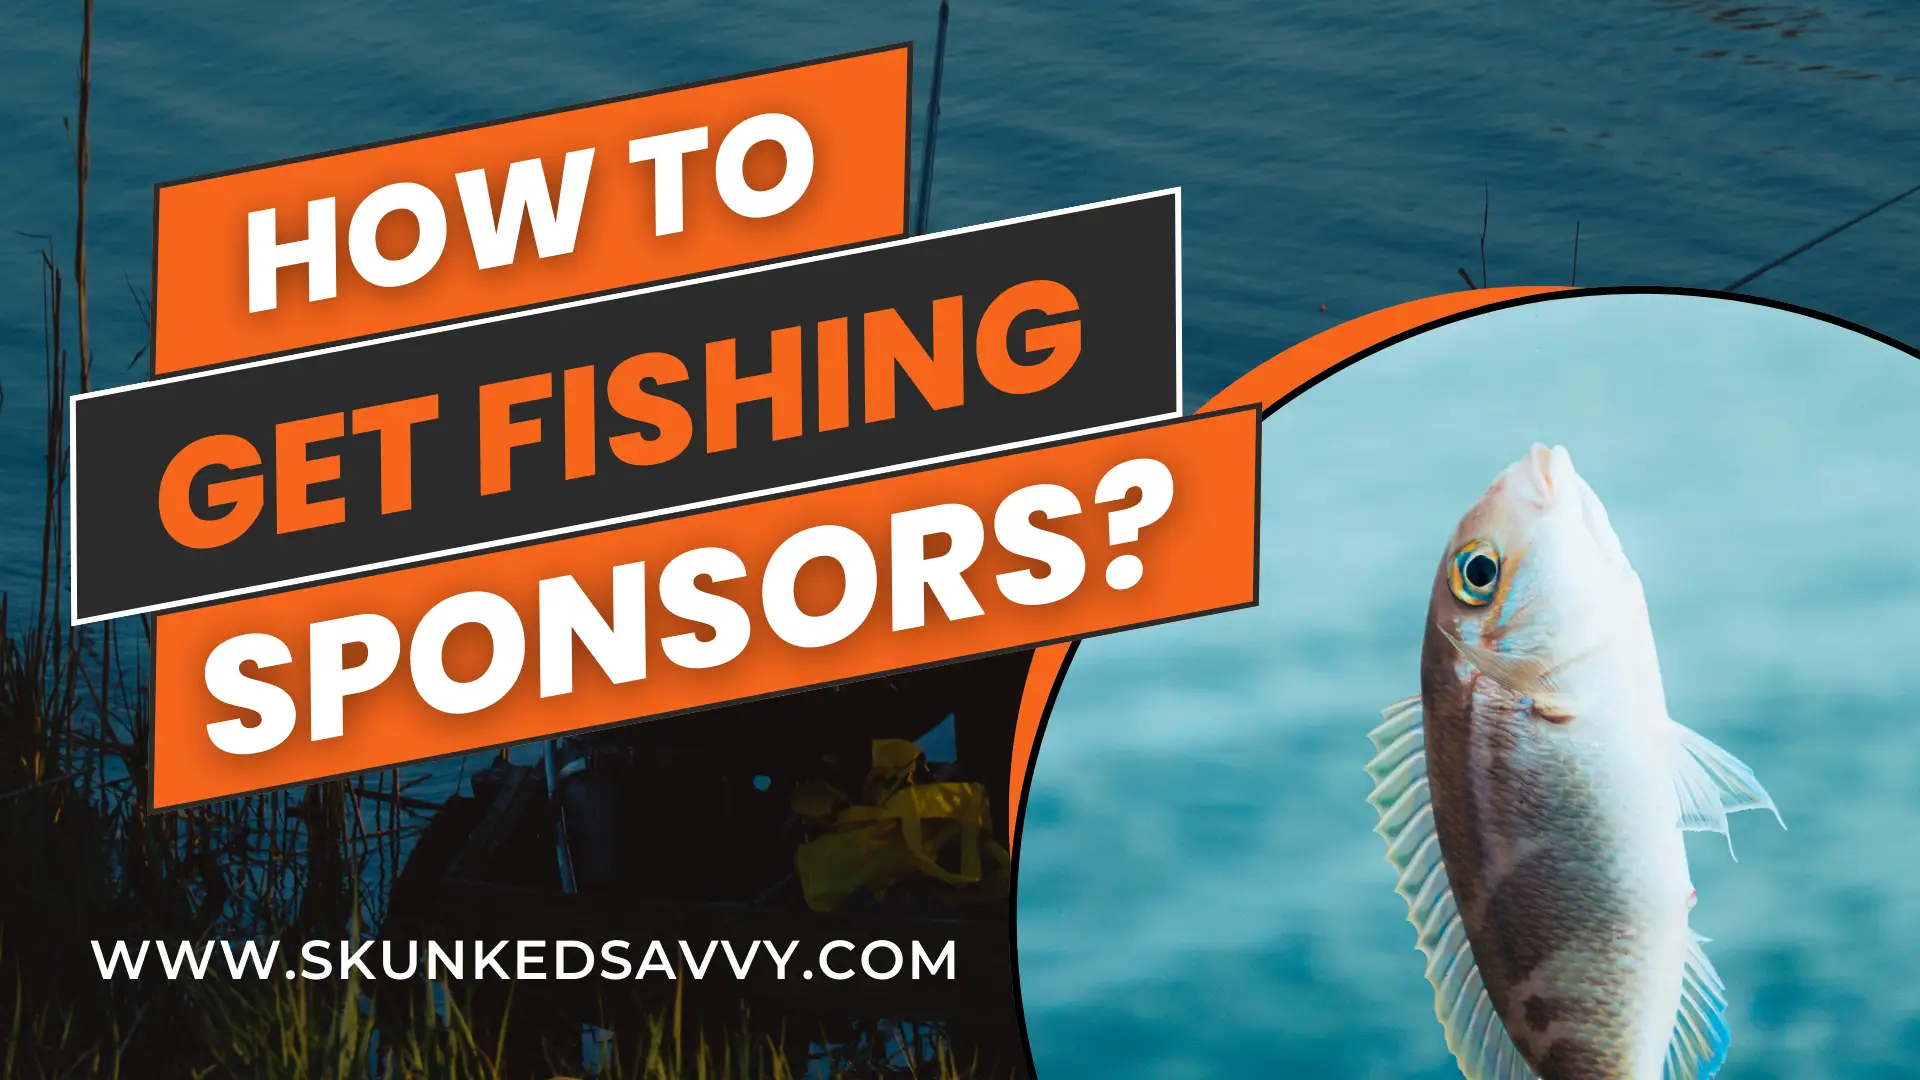 How to Get Fishing Sponsors